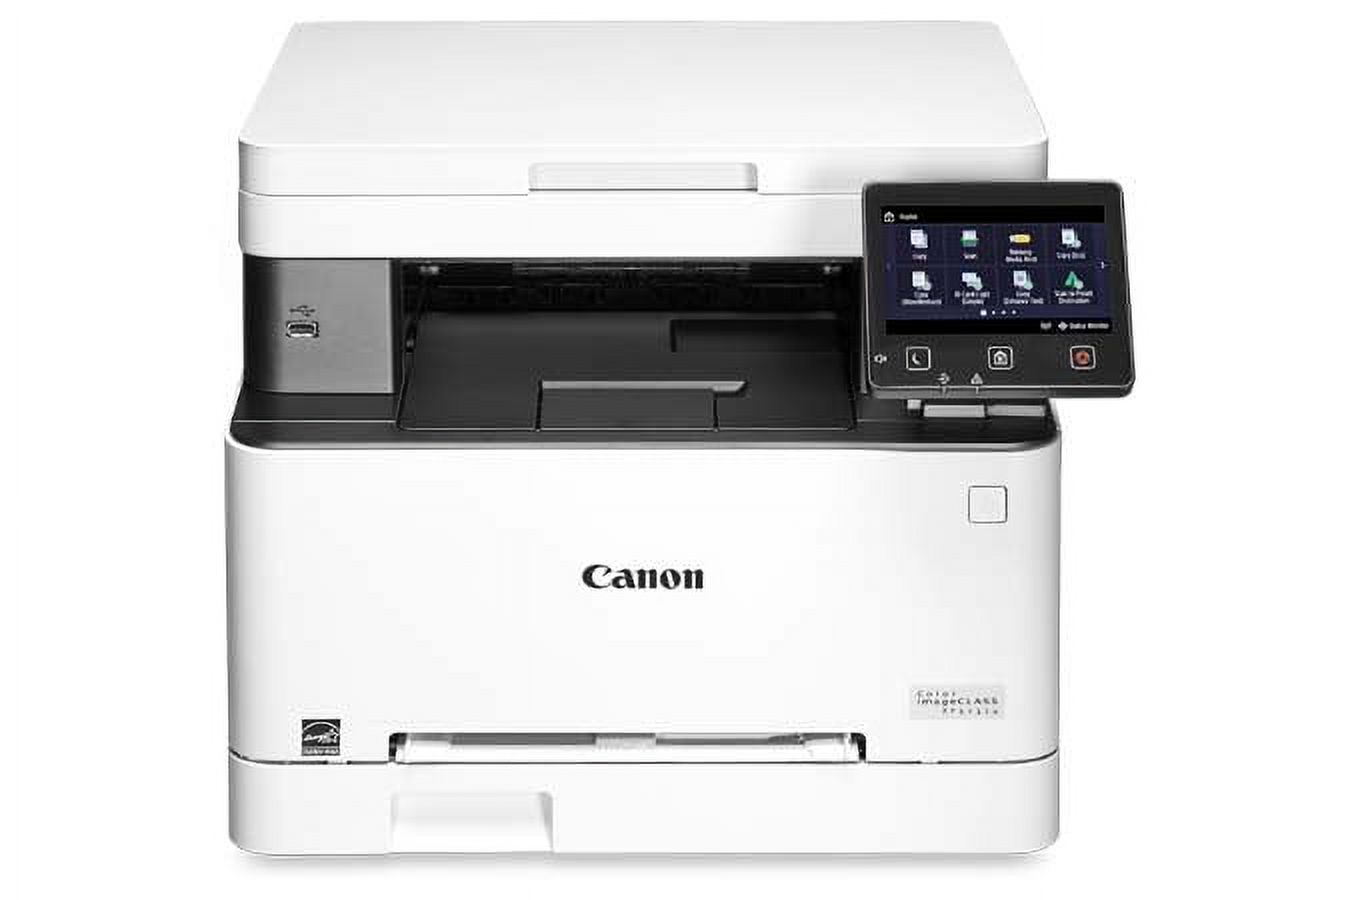 Canon Color imageCLASS MF641Cw - Multifunction, Mobile Ready Laser Printer - image 1 of 12